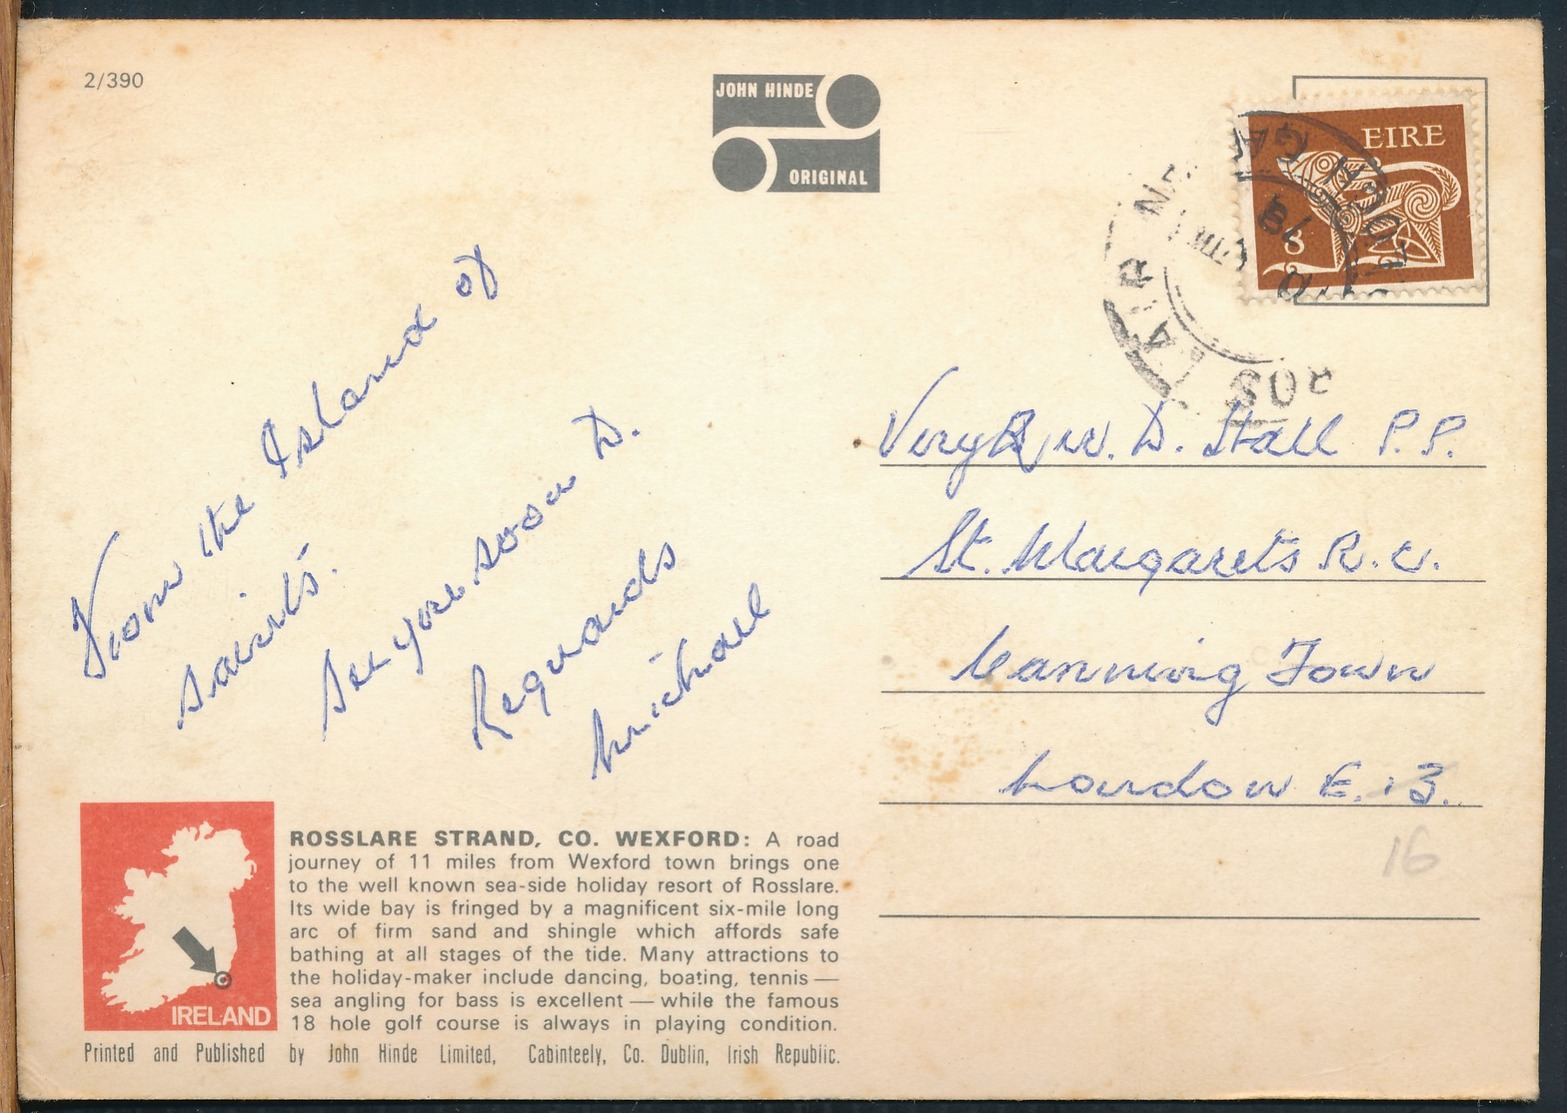 °°° 14918 - IRELAND - WEXFORD - ROSSLARE STRAND. CO. - 1978 With Stamps °°° - Wexford